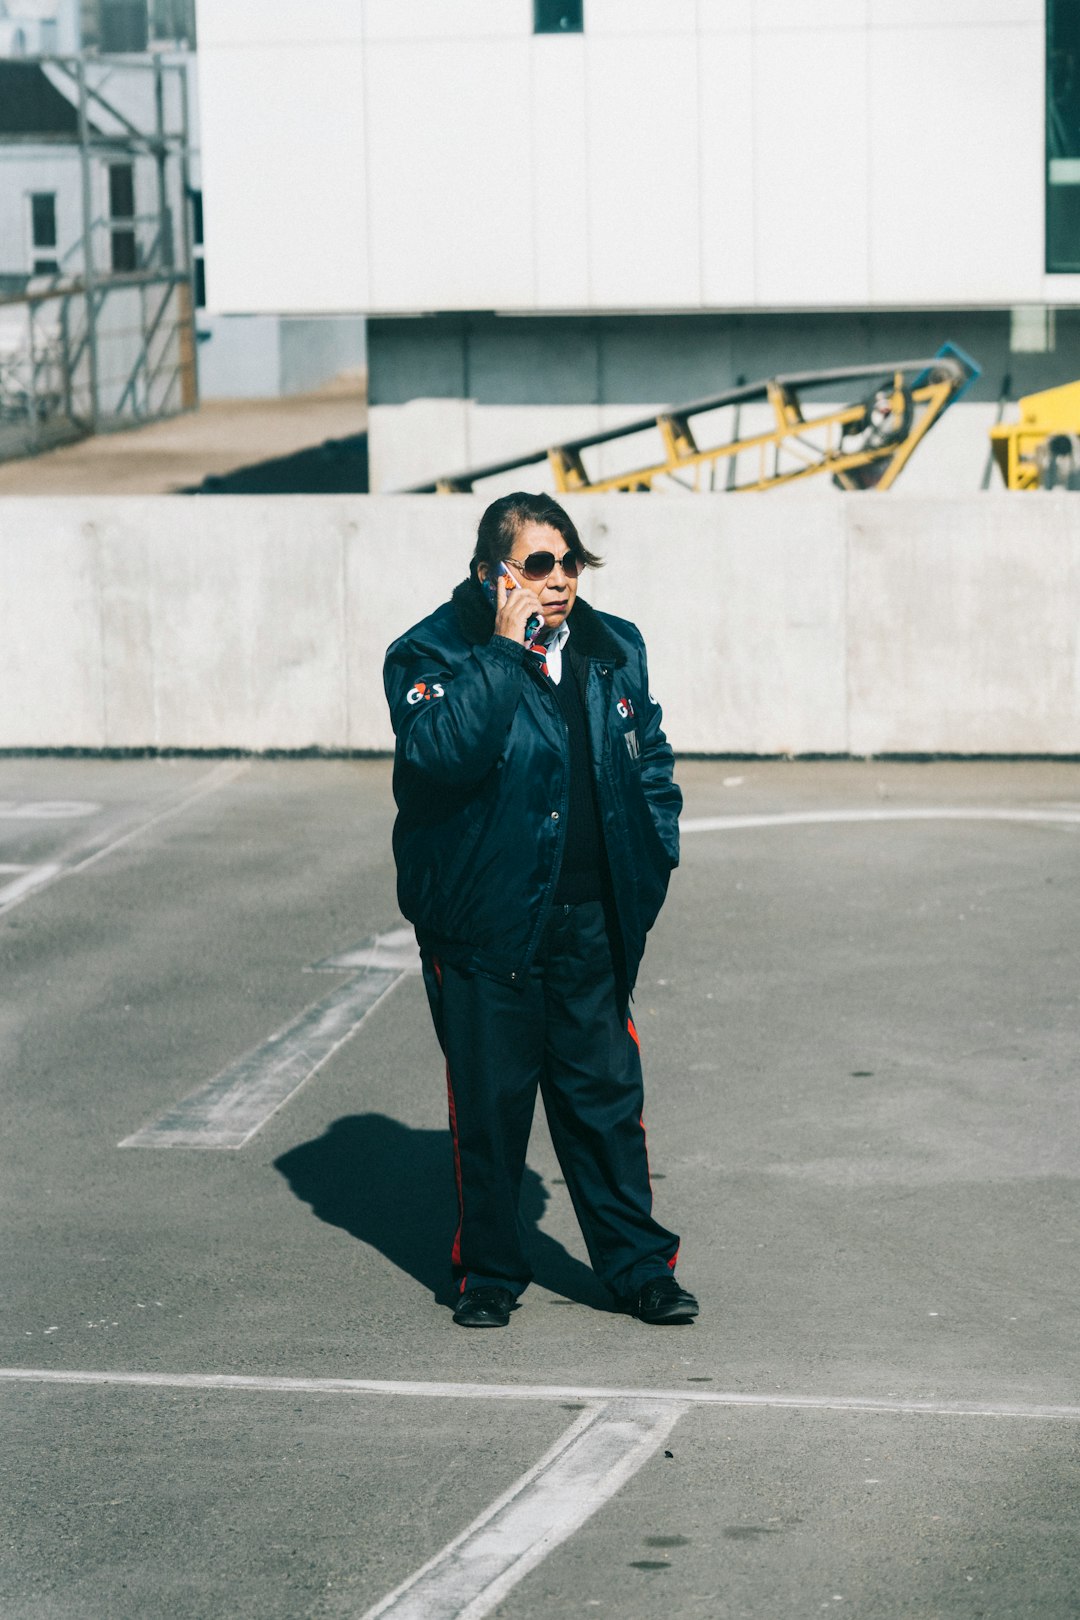 Security woman on the phone in Antofagasta, Chile